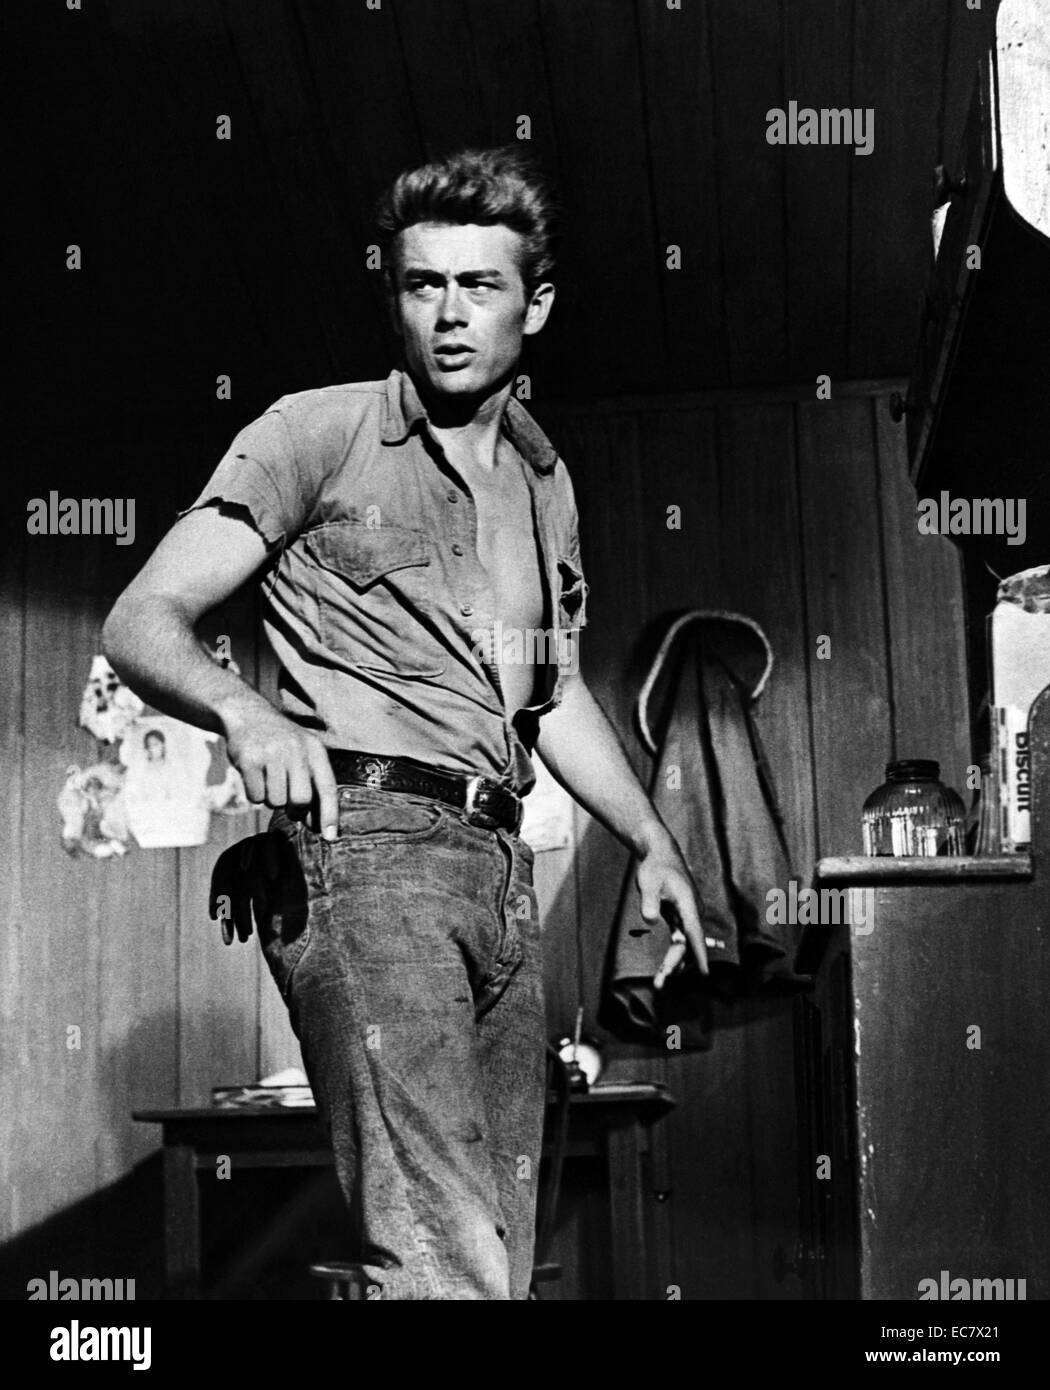 James Byron Dean was an American actor. He is a cultural icon of teenage disillusionment, as expressed in the title of his most celebrated film, Rebel Without a Cause (1955), in which he starred as troubled teenager Jim Stark. The other two roles that defined his stardom were loner Cal Trask in East of Eden (1955) and surly ranch hand Jett Rink in Giant (1956). Dean's enduring fame and popularity rest on his performances in only these three films which were all leading roles. Stock Photo